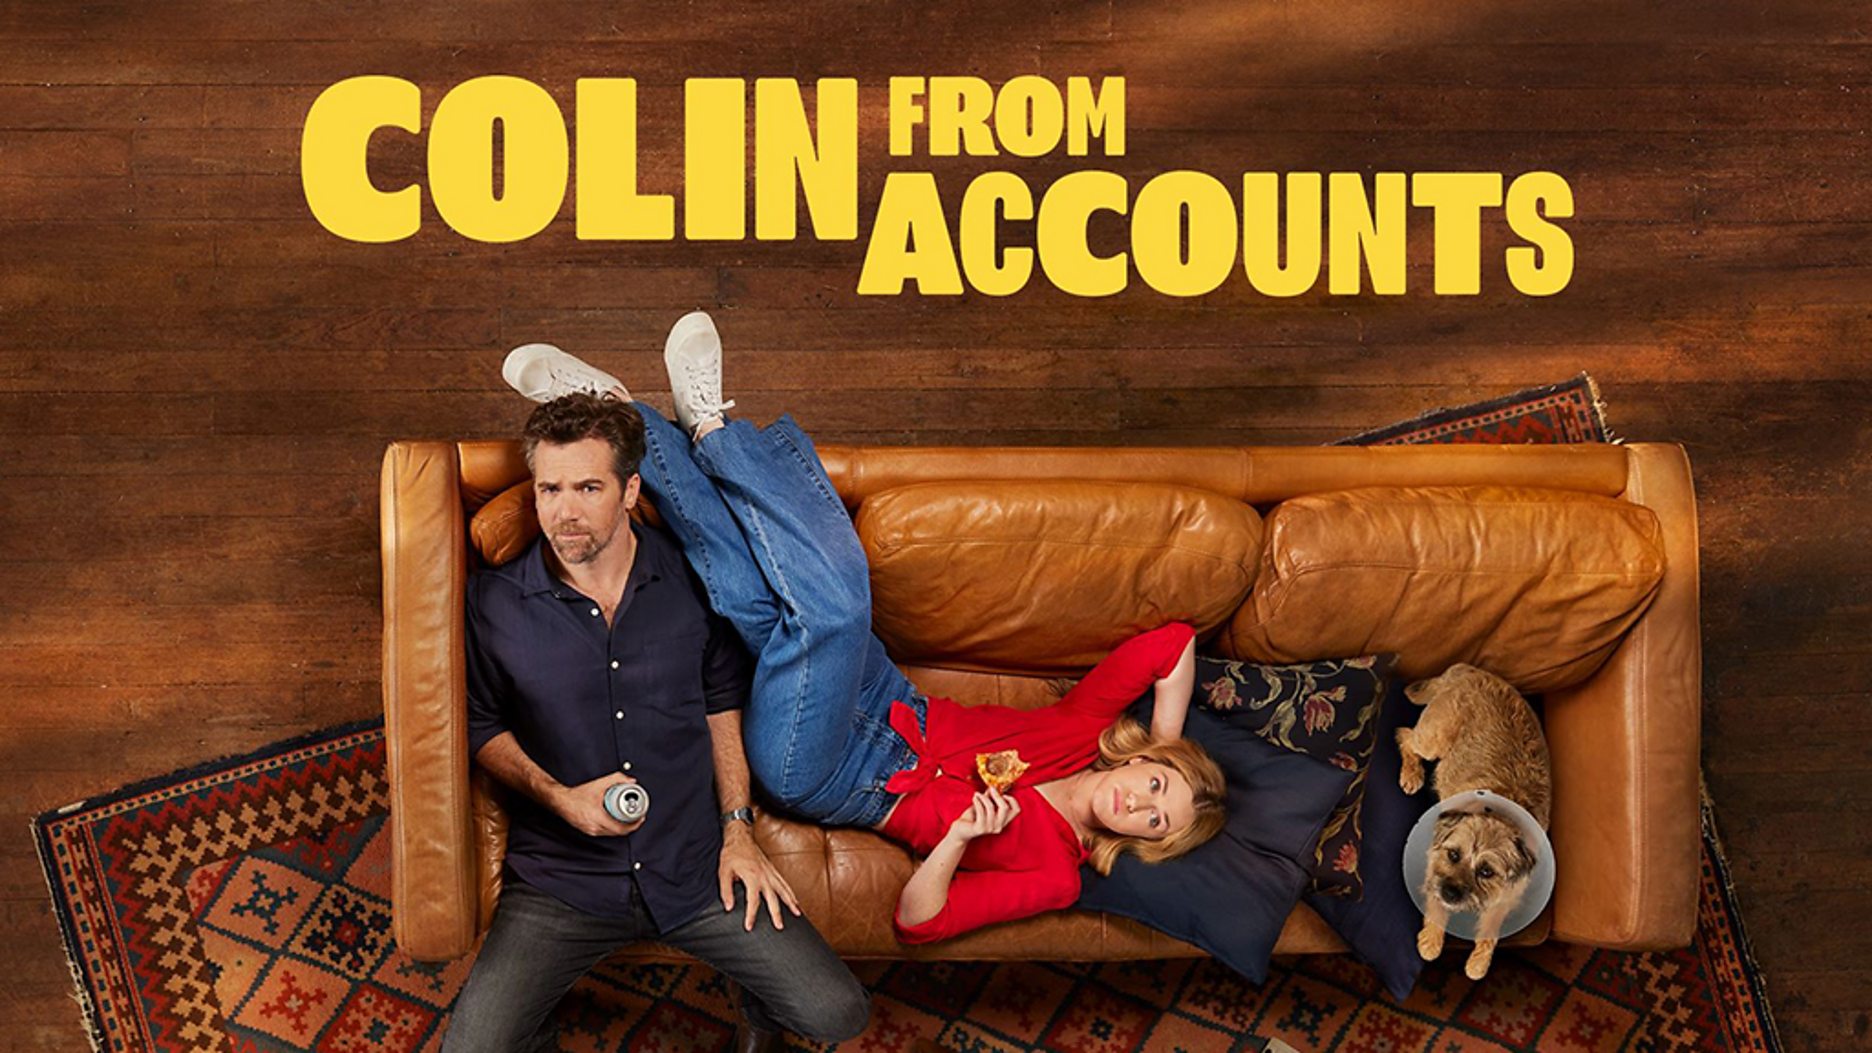 A second series of Colin From Accounts is on the way